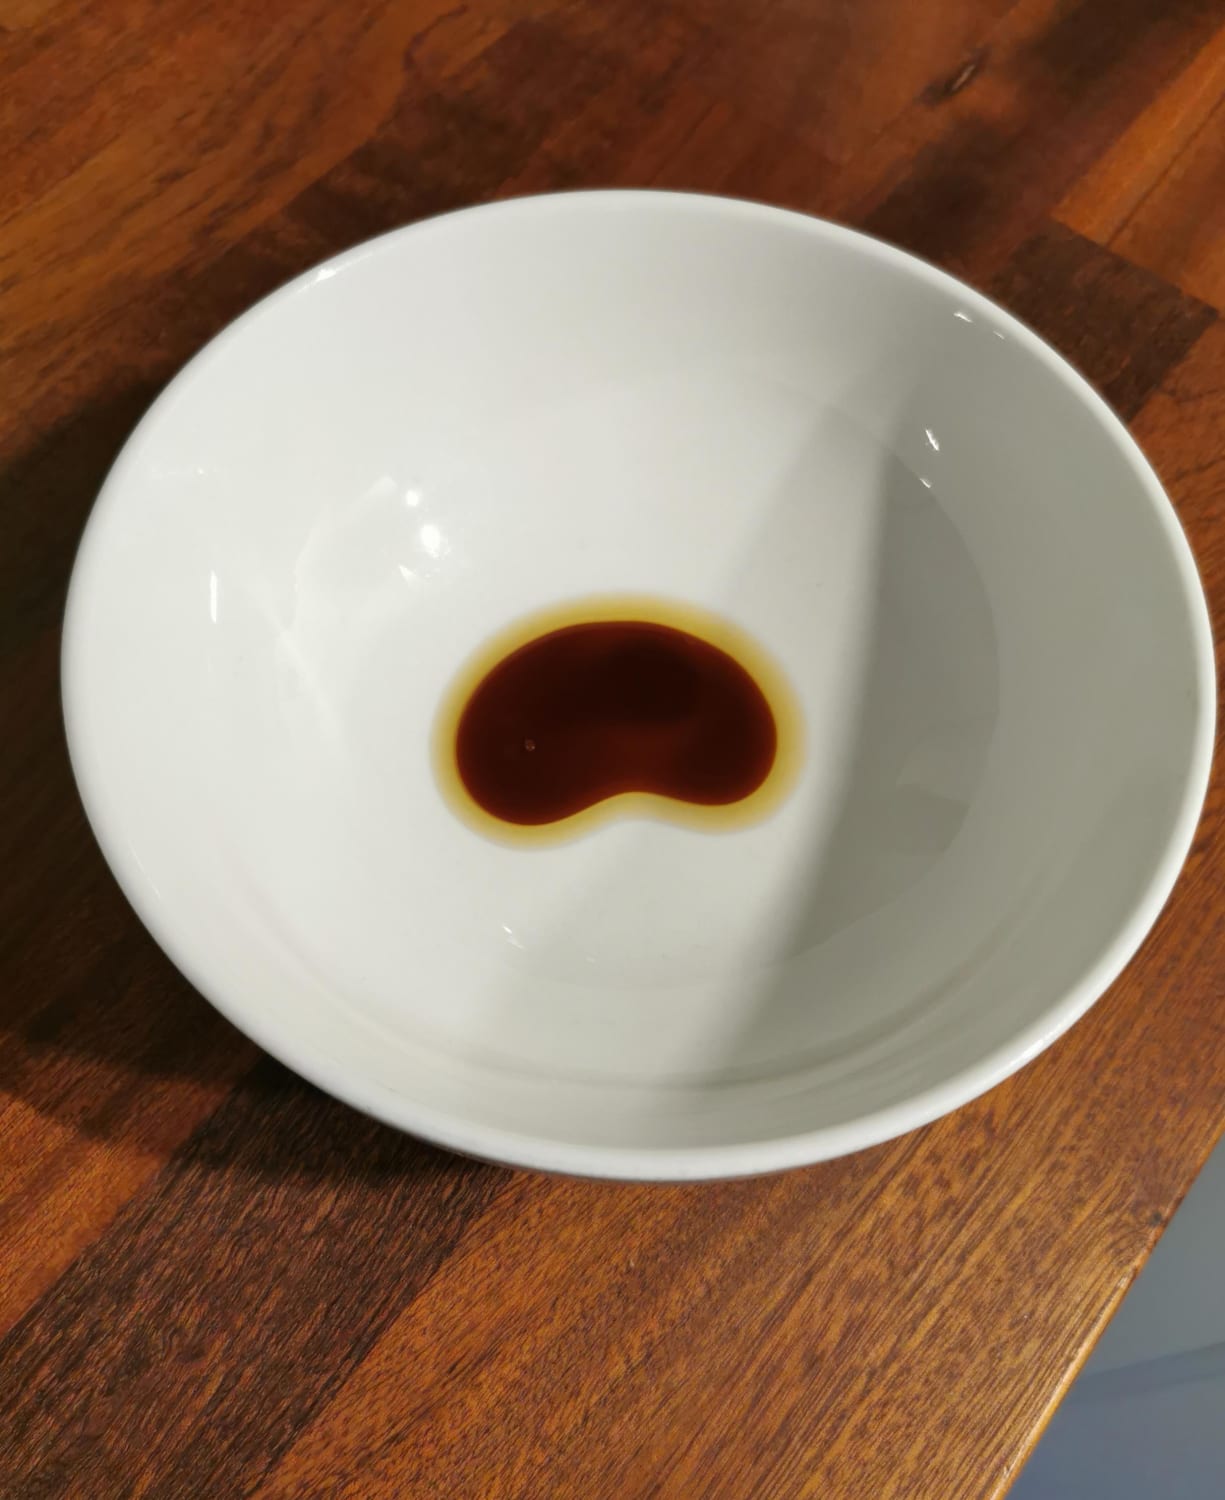 I poured soy sauce into some sesame oil in a bowl and inadvertently made this satisfying little bean